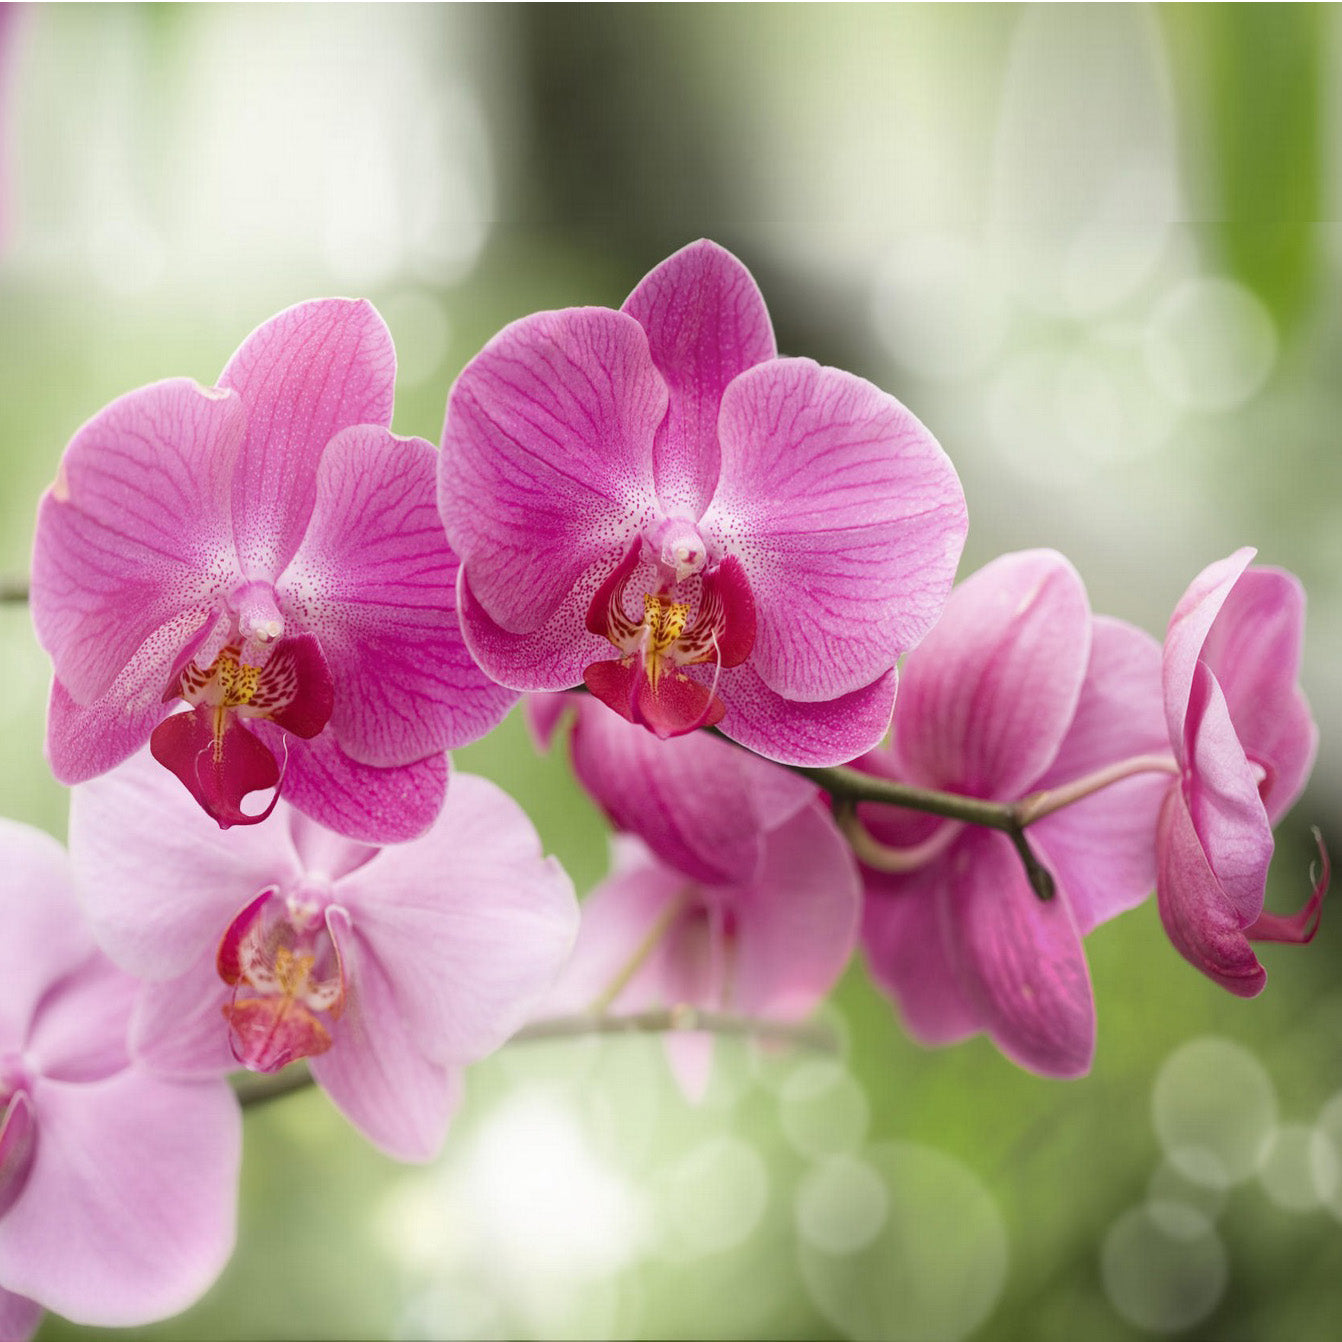 Orchid - the elegant ageless flower | Native Essentials Skin Care